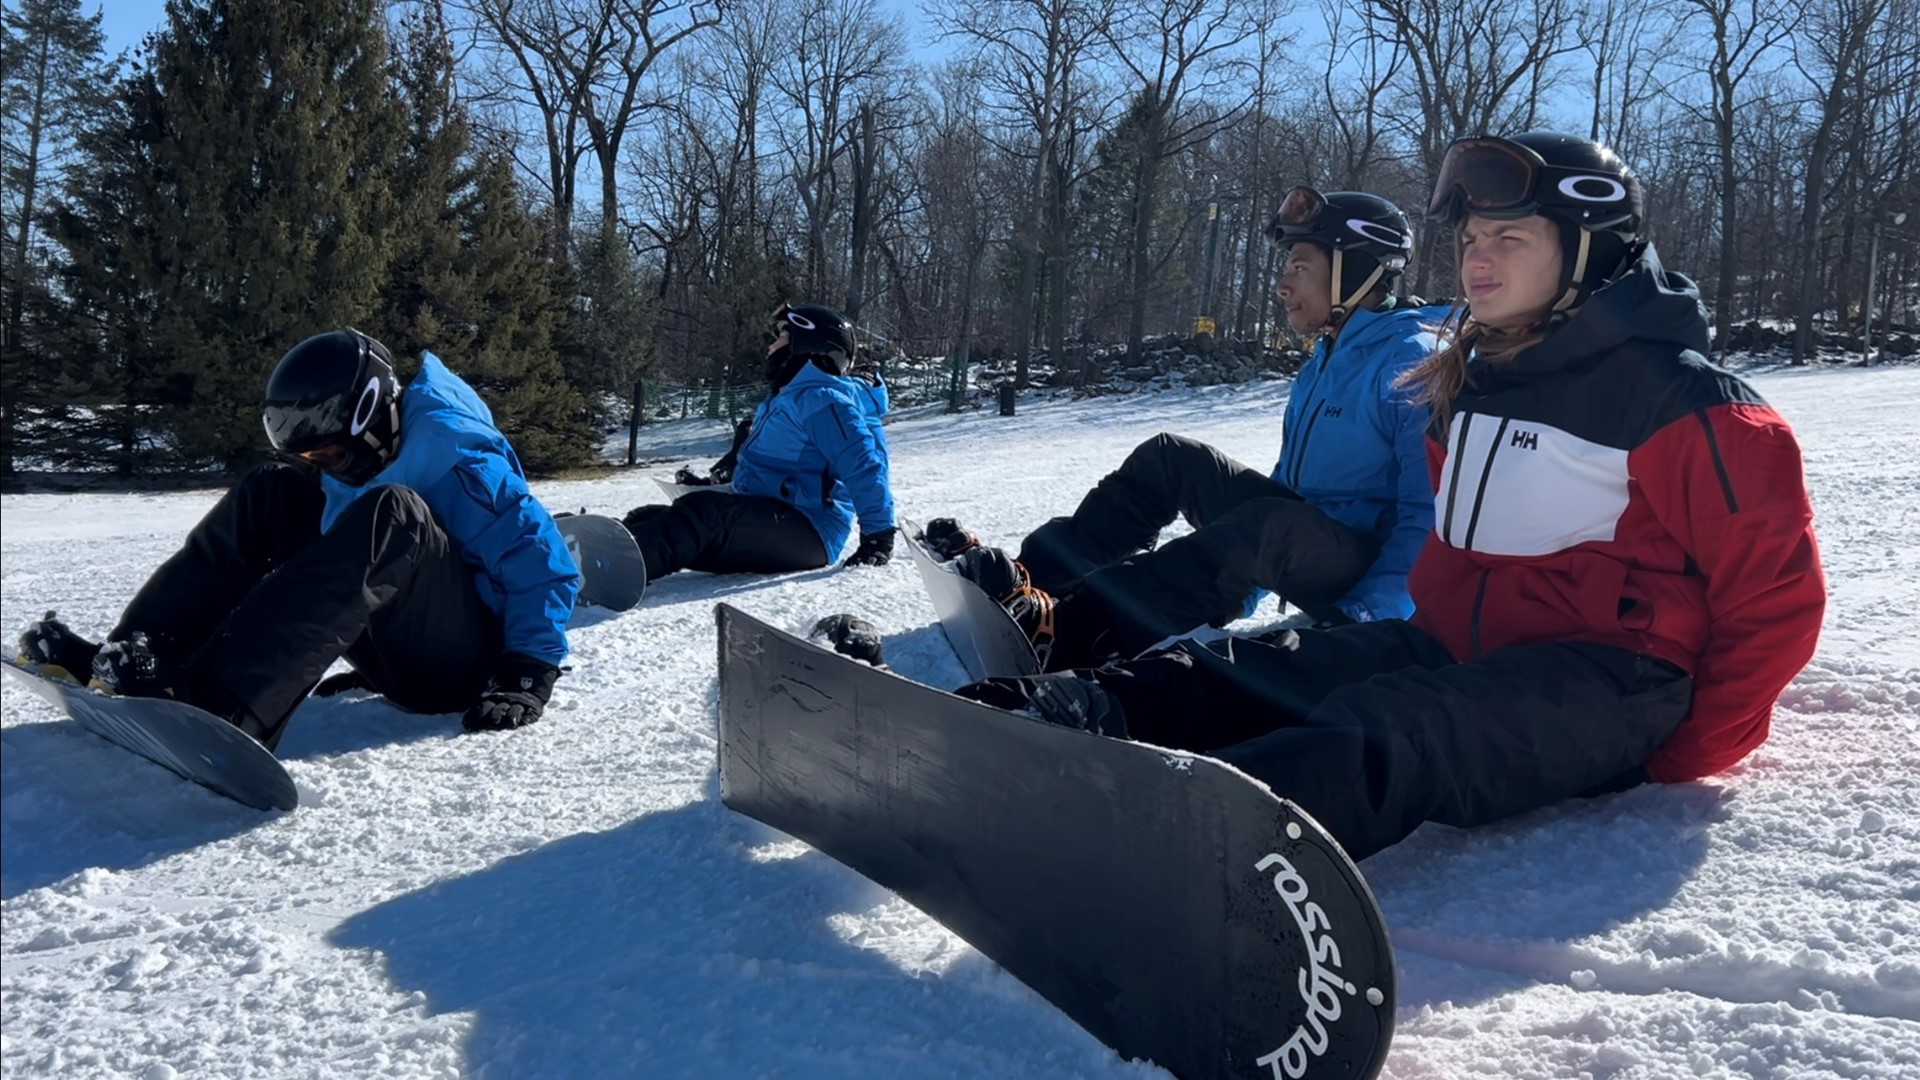 Once a week, Yellow Breeches takes their students off campus for adventure-based learning at places like Roundtop Mountain Resort.